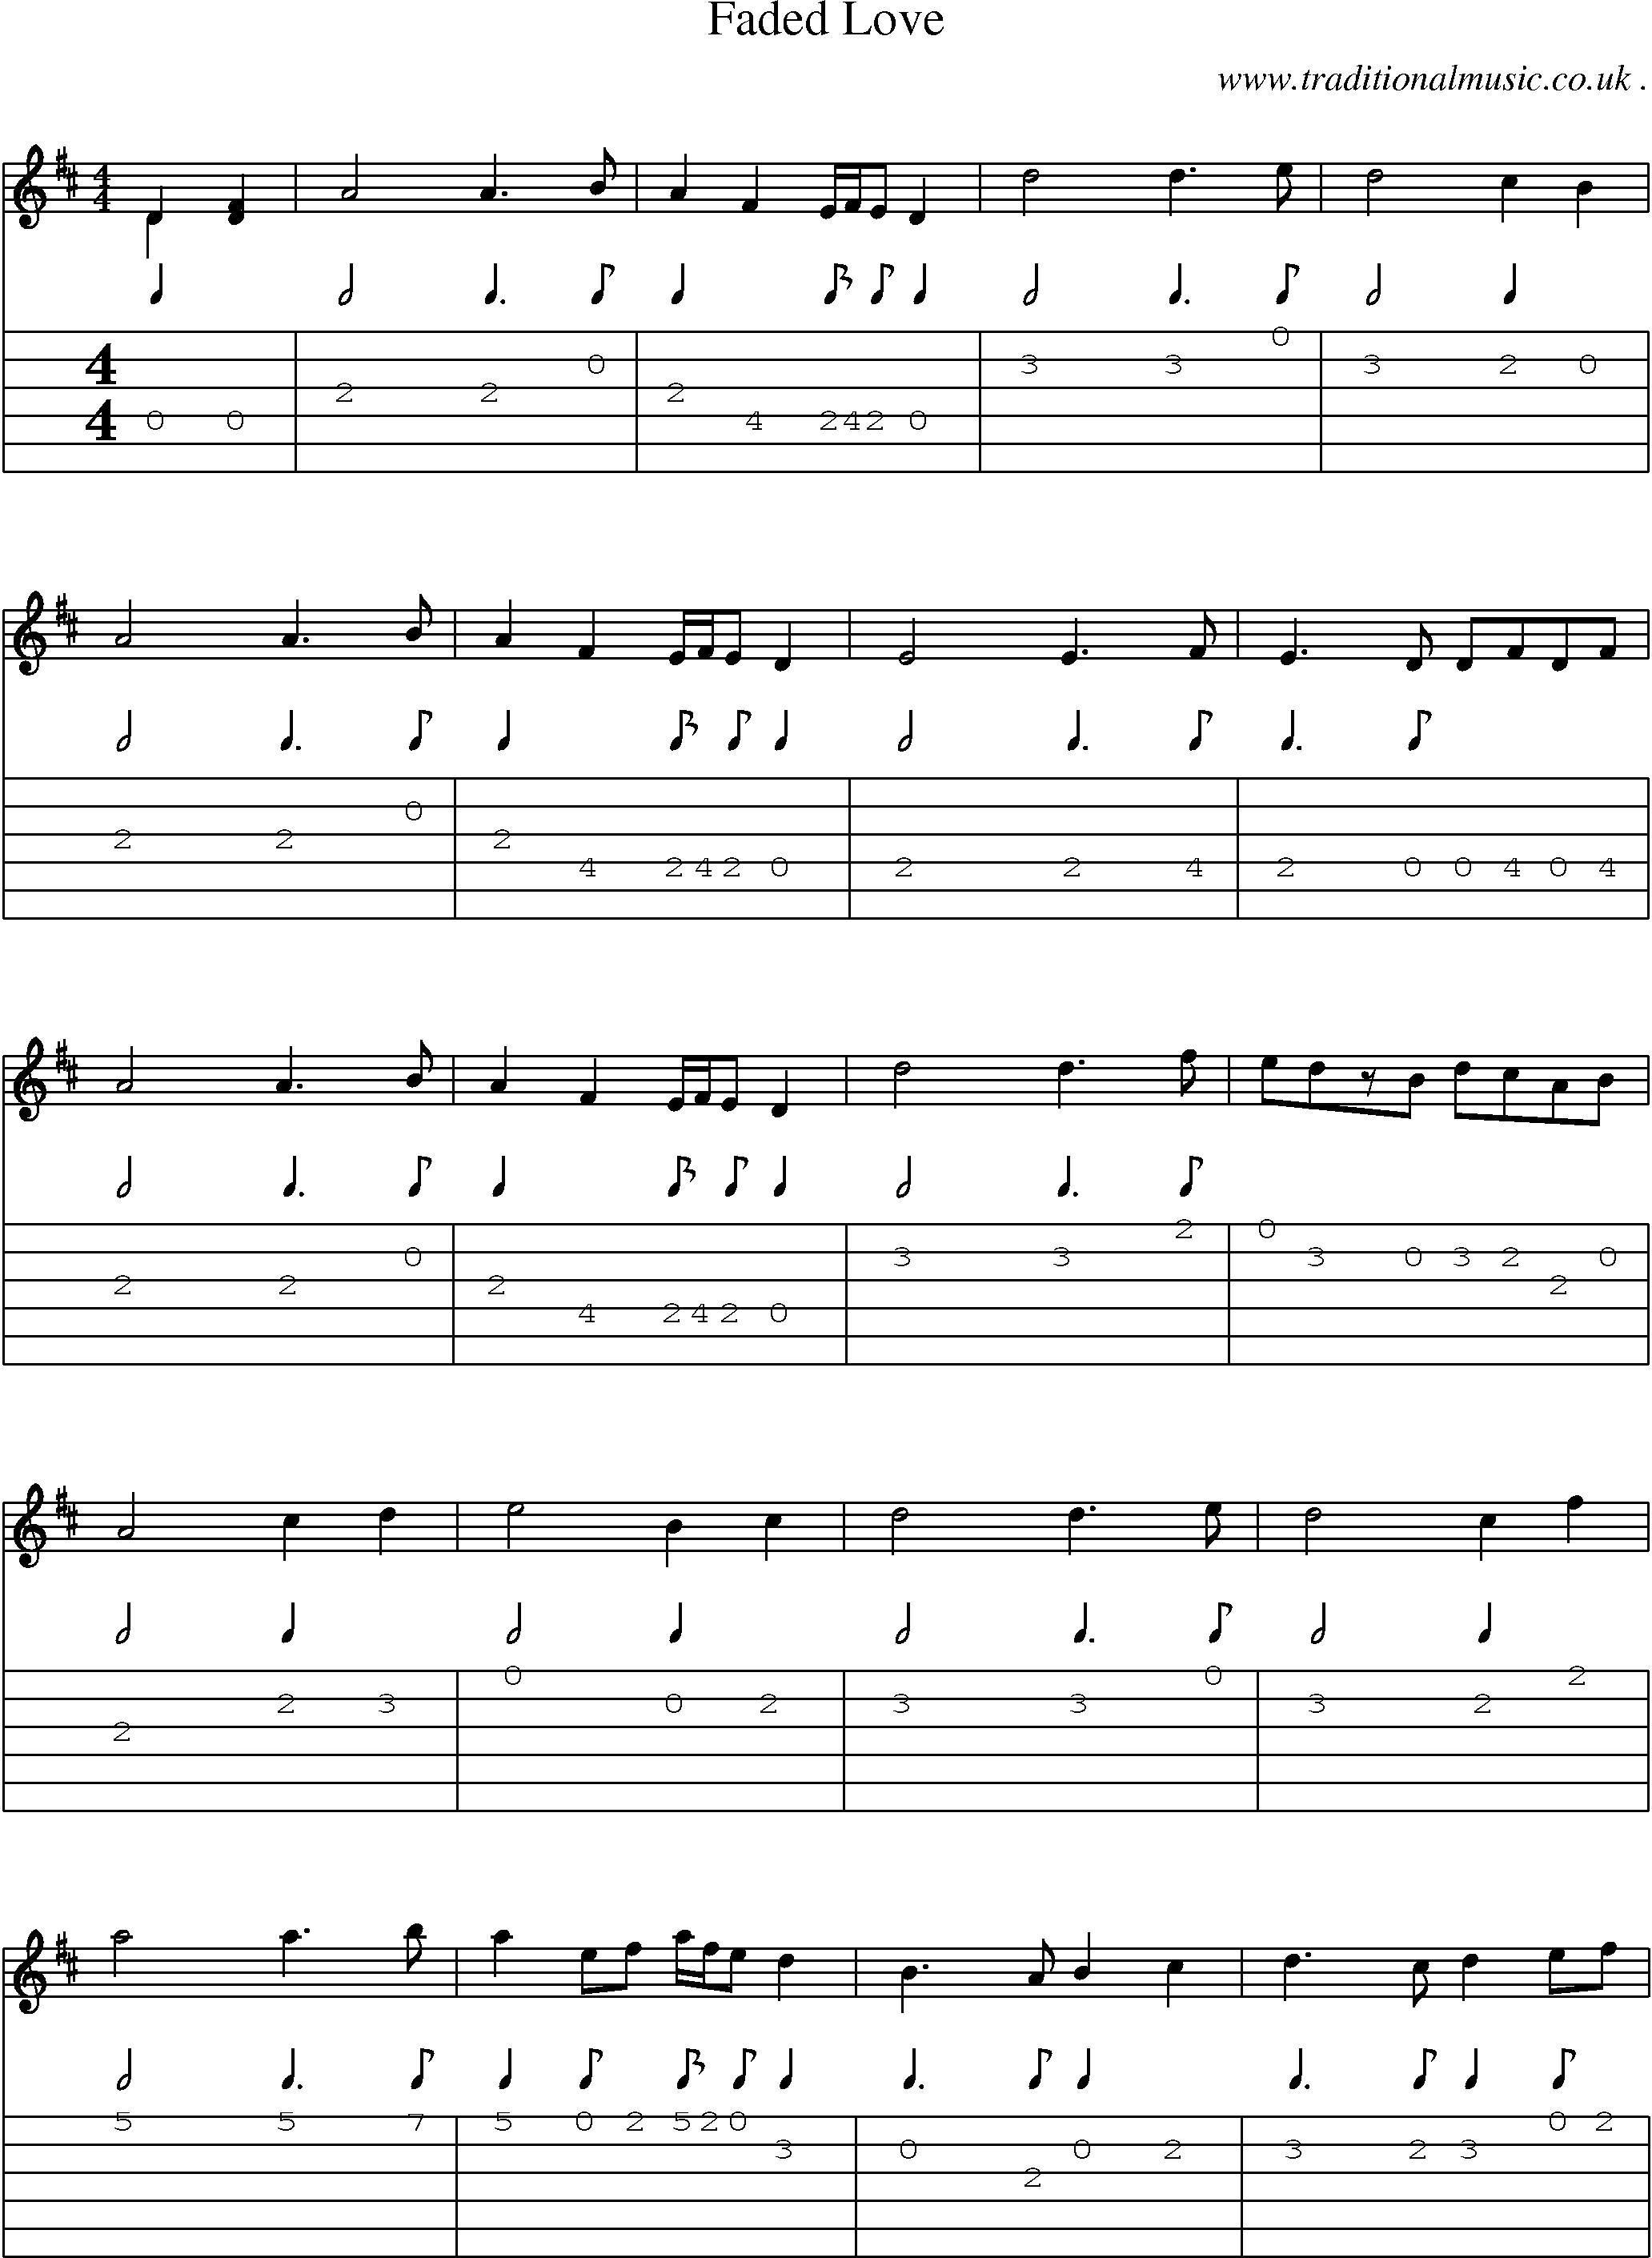 Music Score and Guitar Tabs for Faded Love